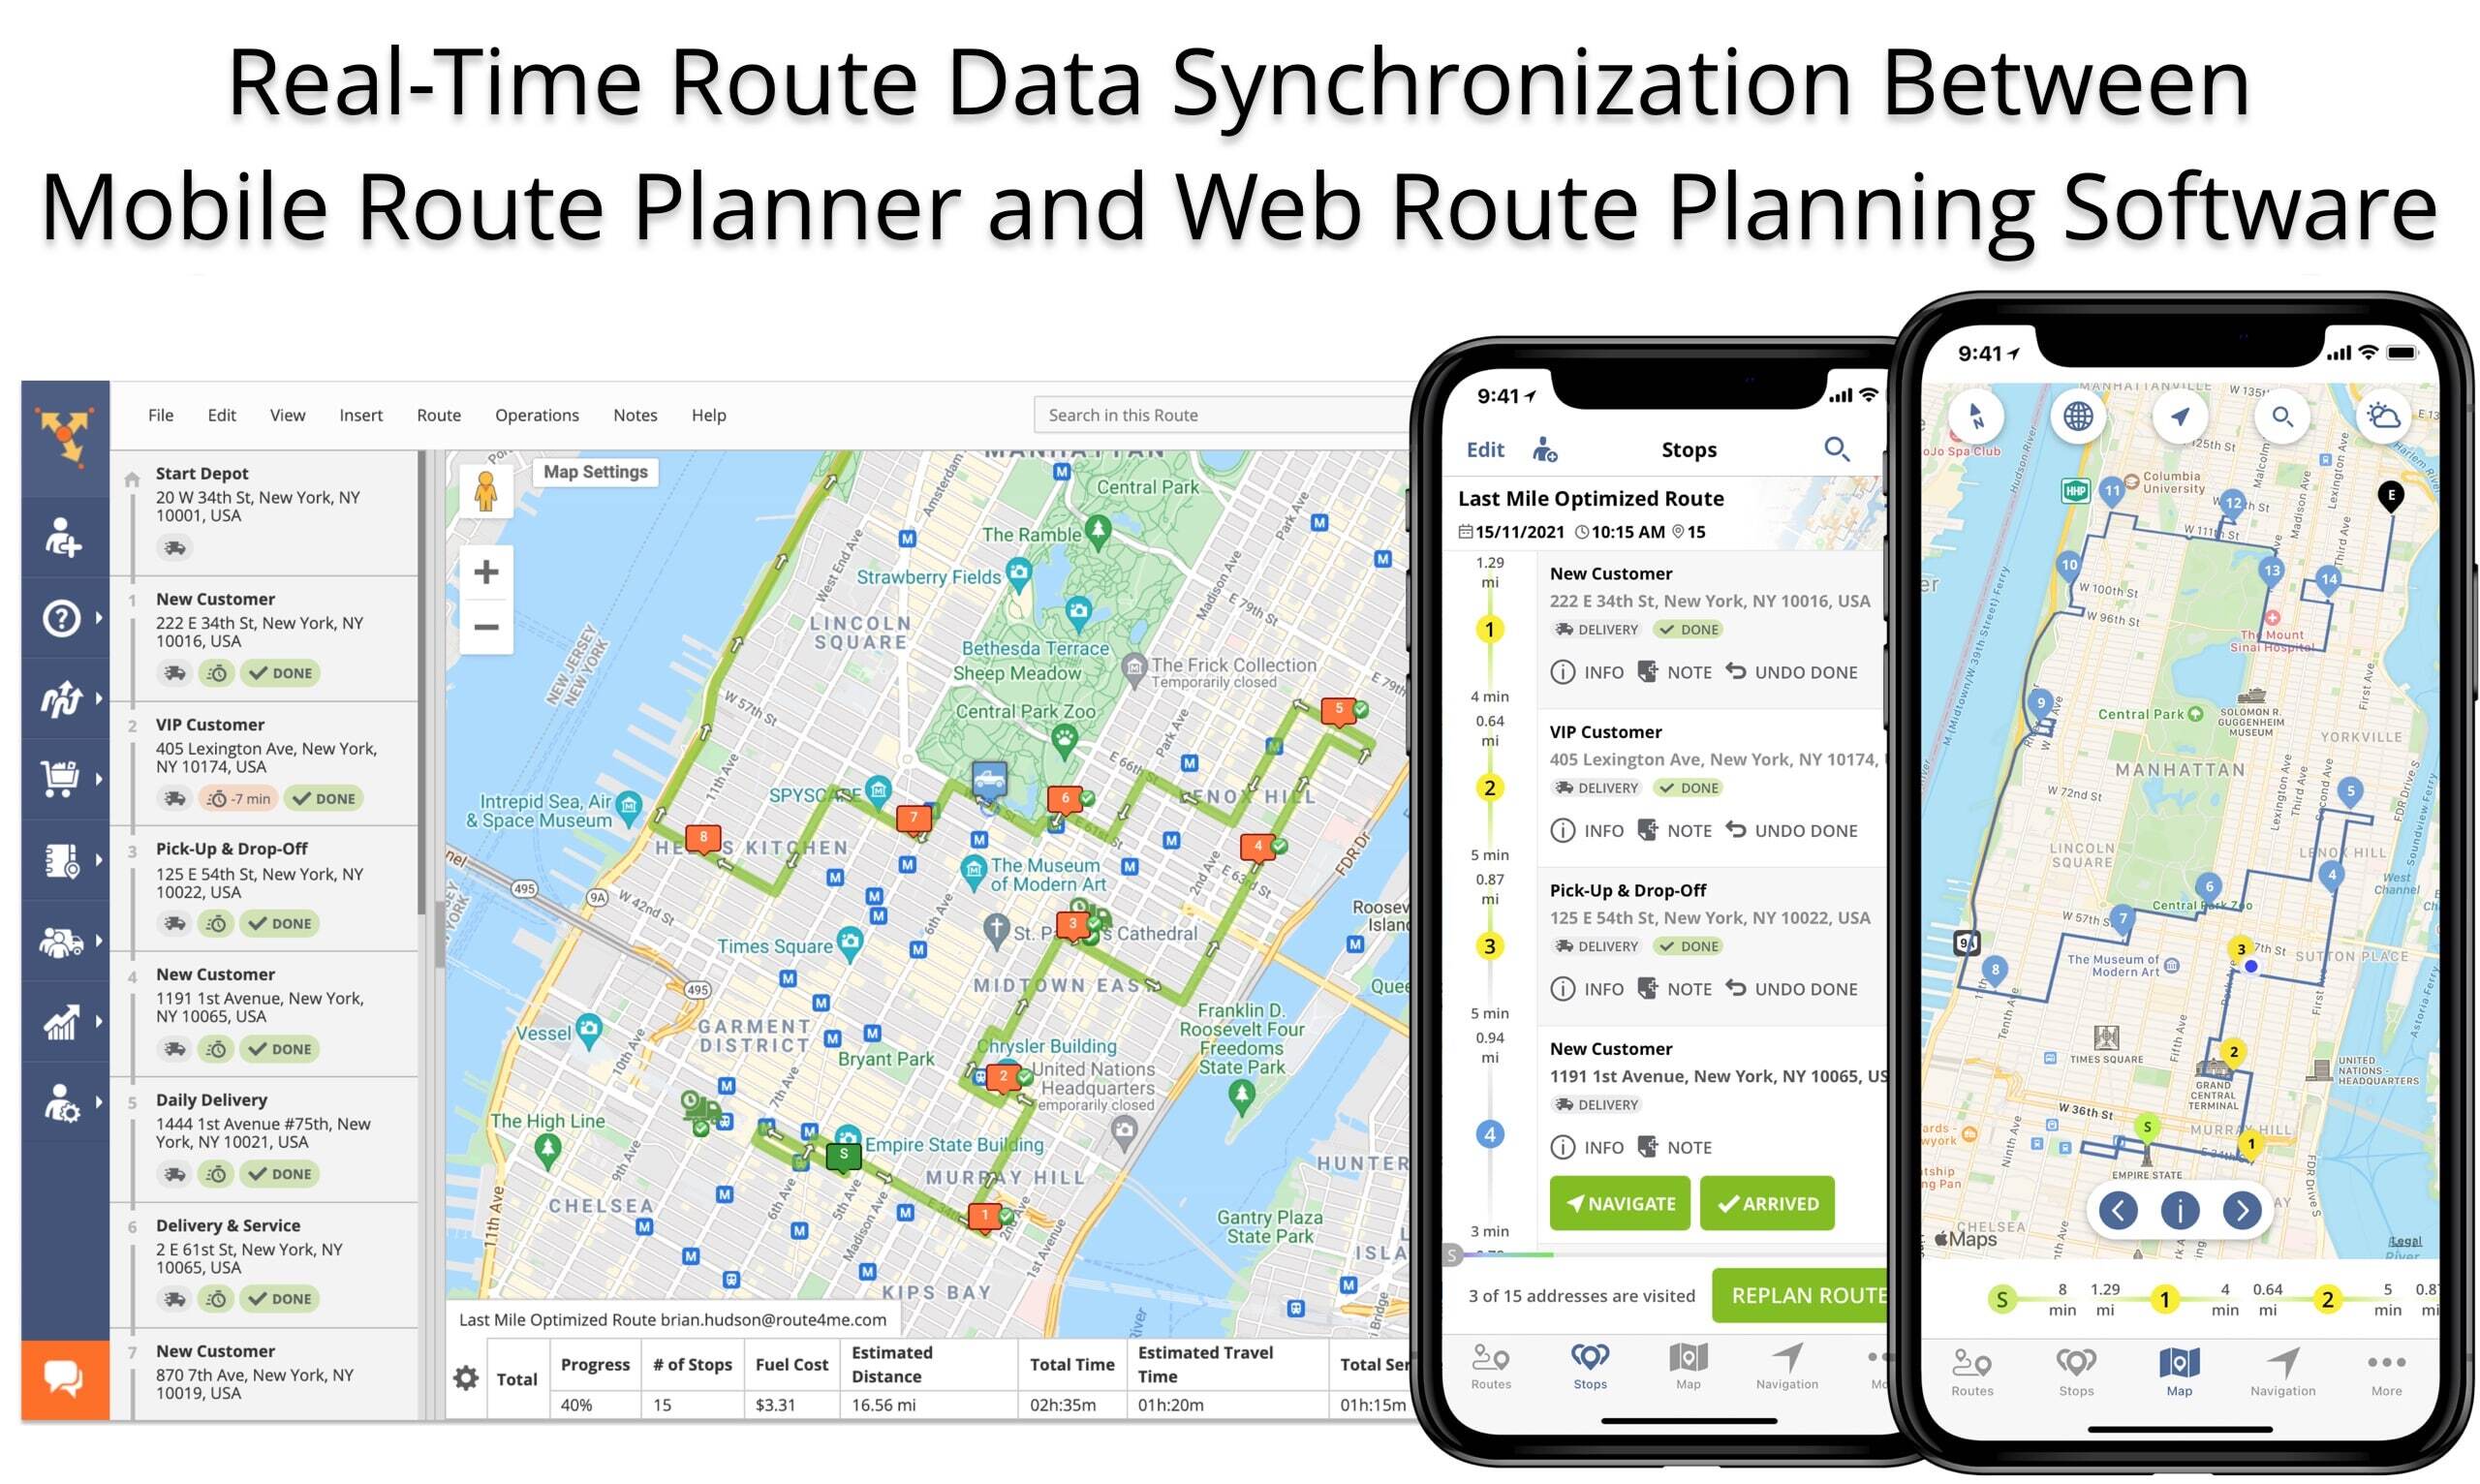 Real-time routing data synchronization between Route4Me's Website and mobile route planner app.